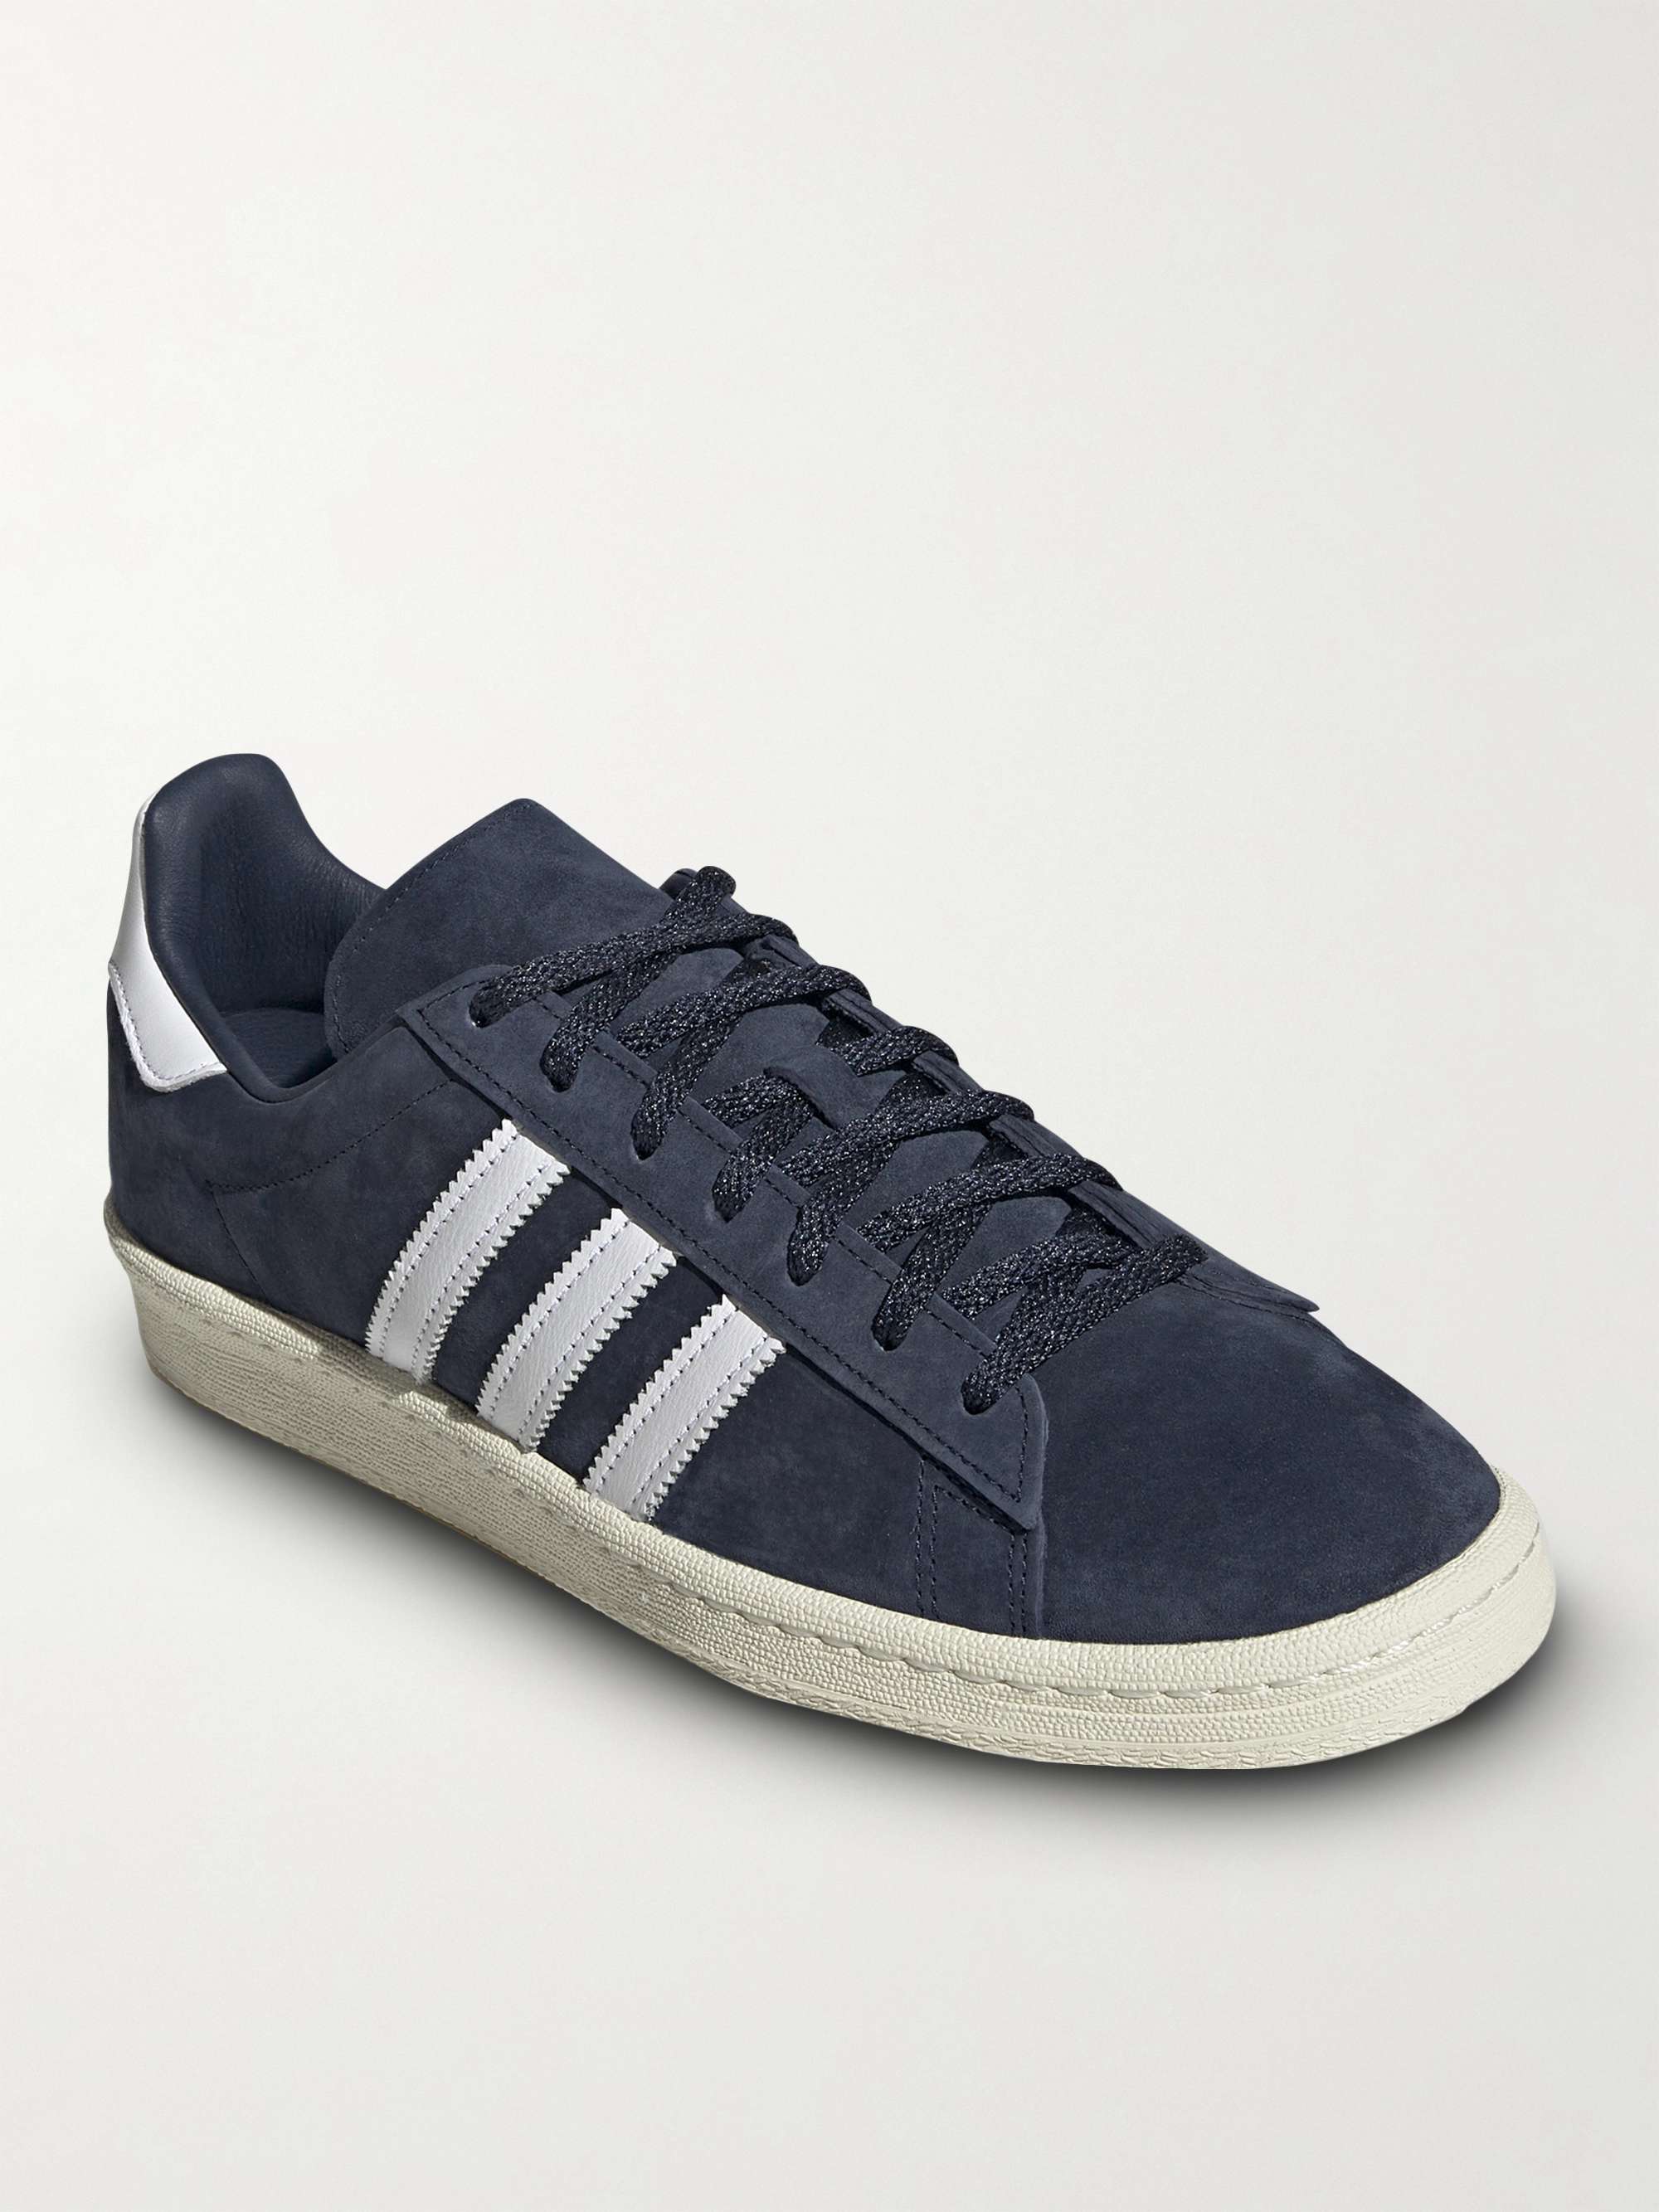 ADIDAS ORIGINALS Campus 80s Leather-Trimmed Suede Sneakers | MR PORTER